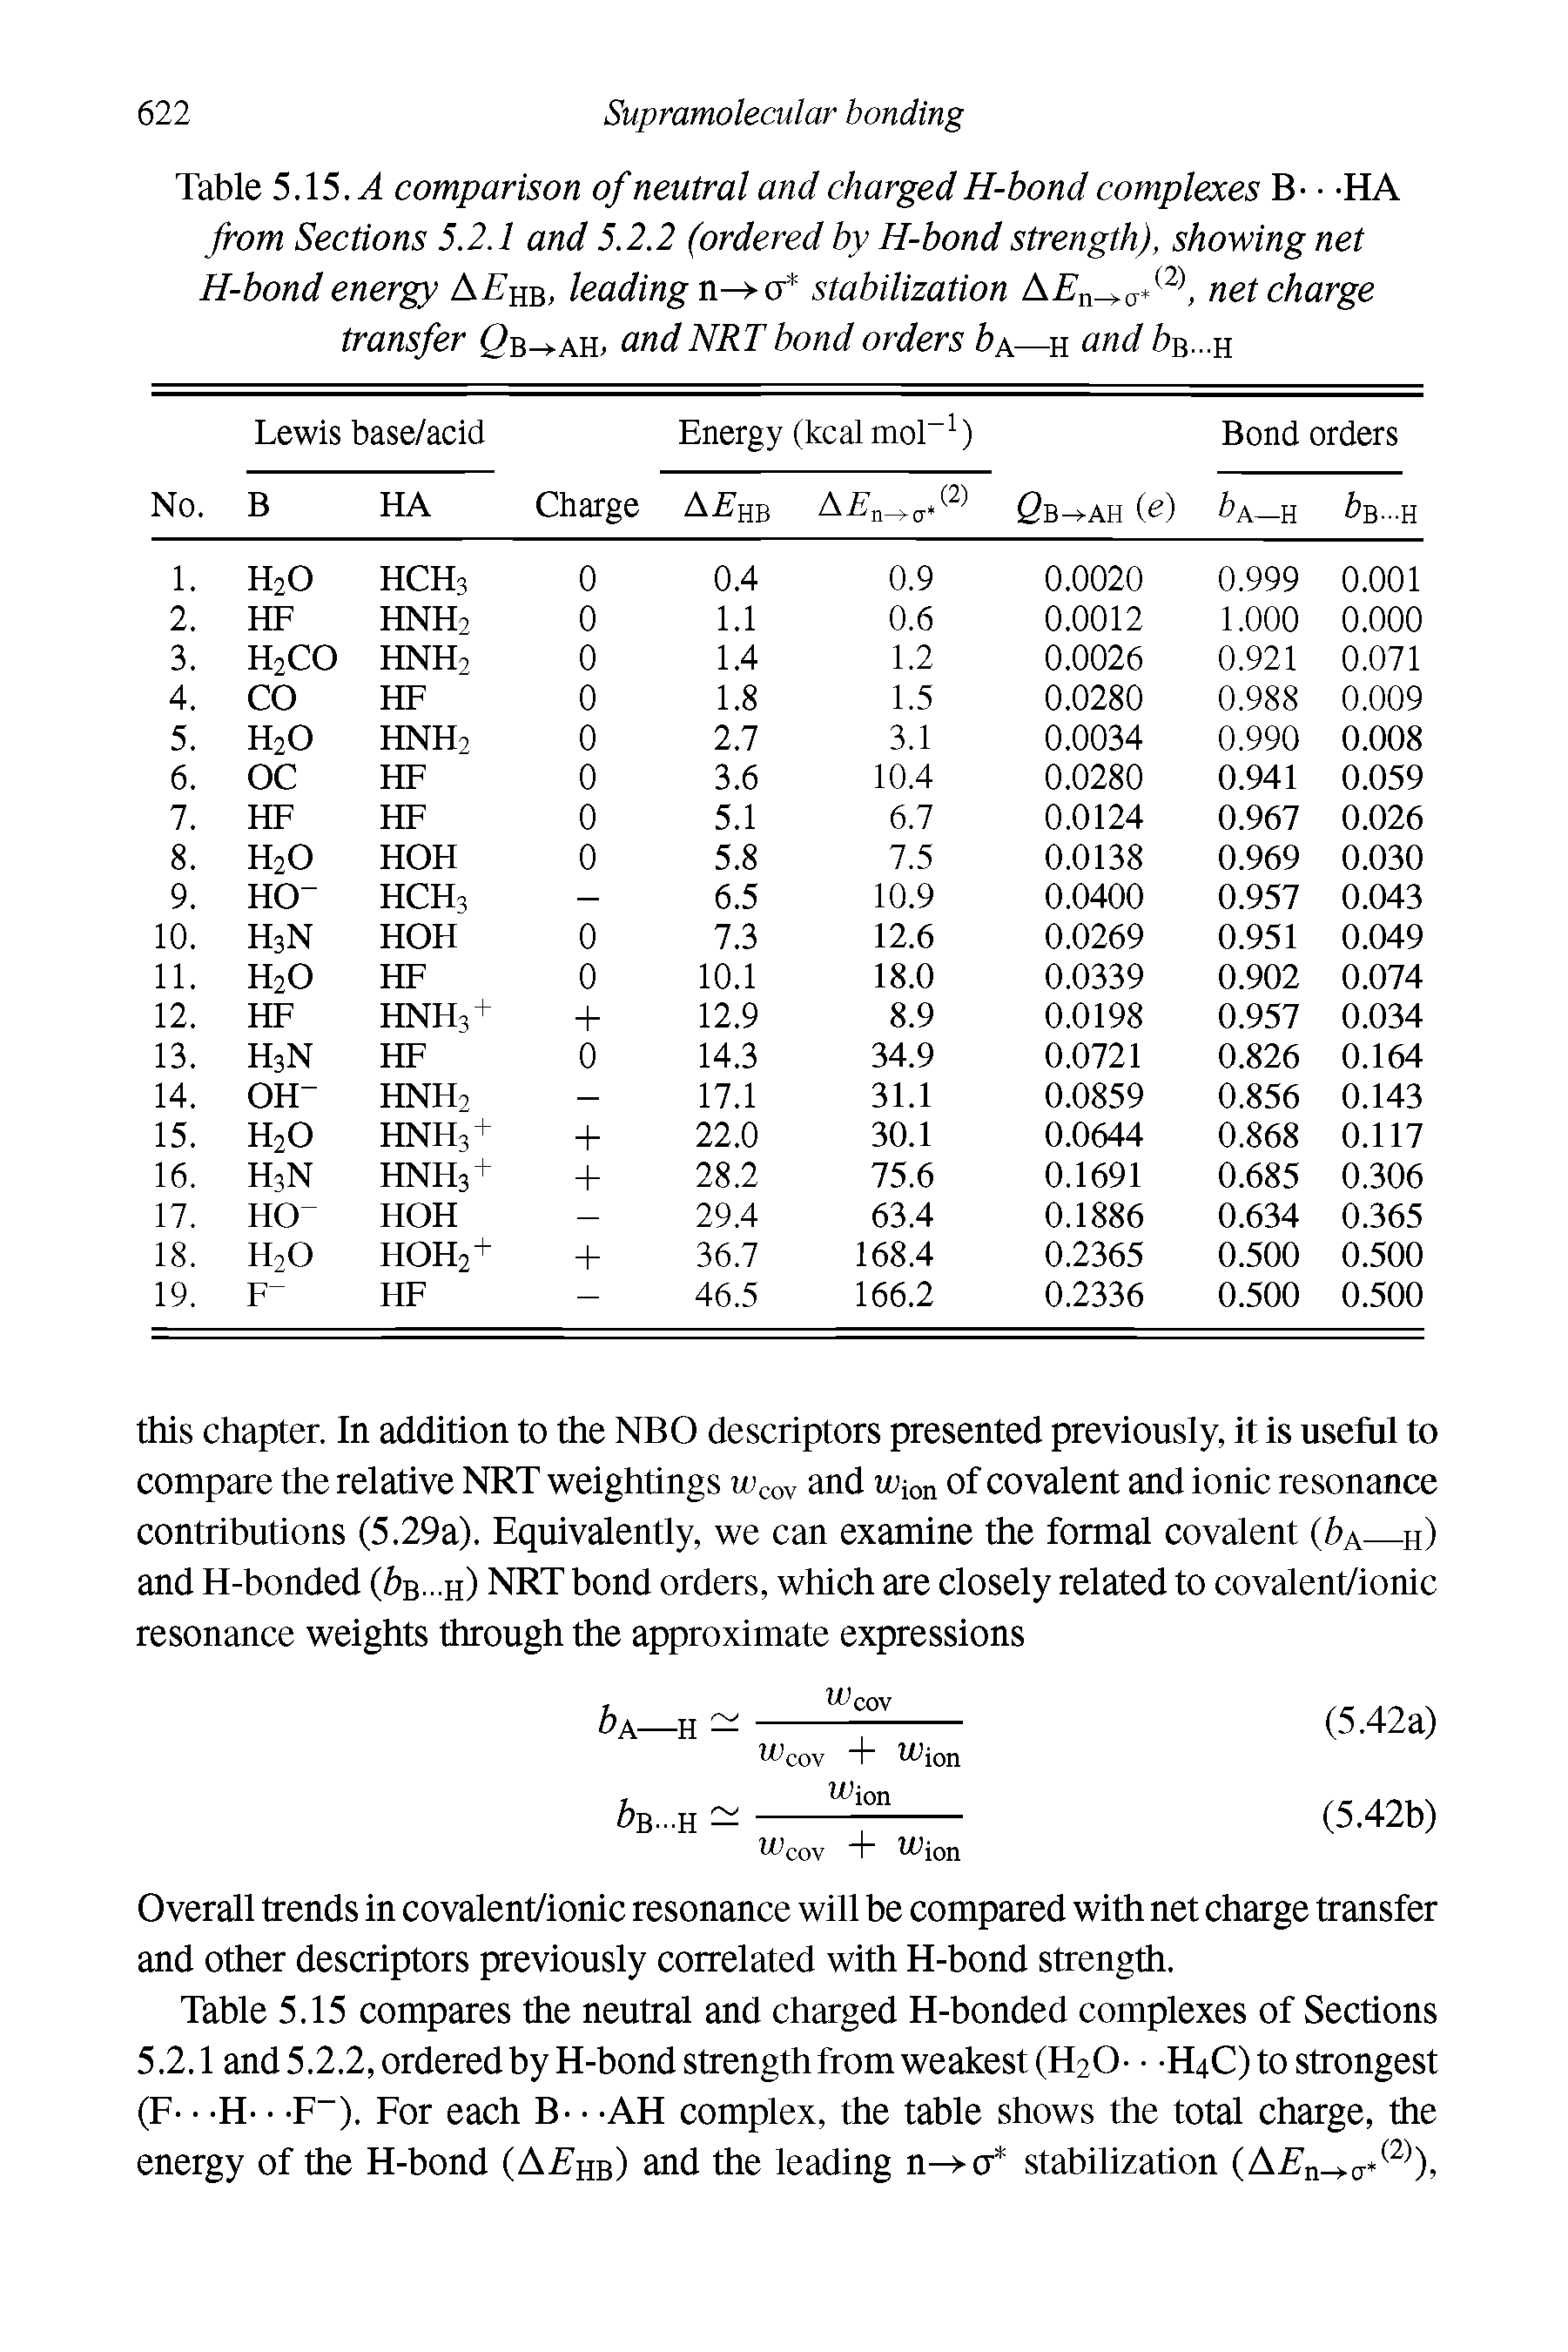 Table 5.15. A comparison of neutral and charged H-bond complexes B- -HA from Sections 5.2.1 and 5.2.2 (ordered by H-bond strength), showing net H-bond energy A hb, leading cr stabilization AEn fr2 net charge transfer 0b->-ah, and NRT bond orders bA—h and b-h...